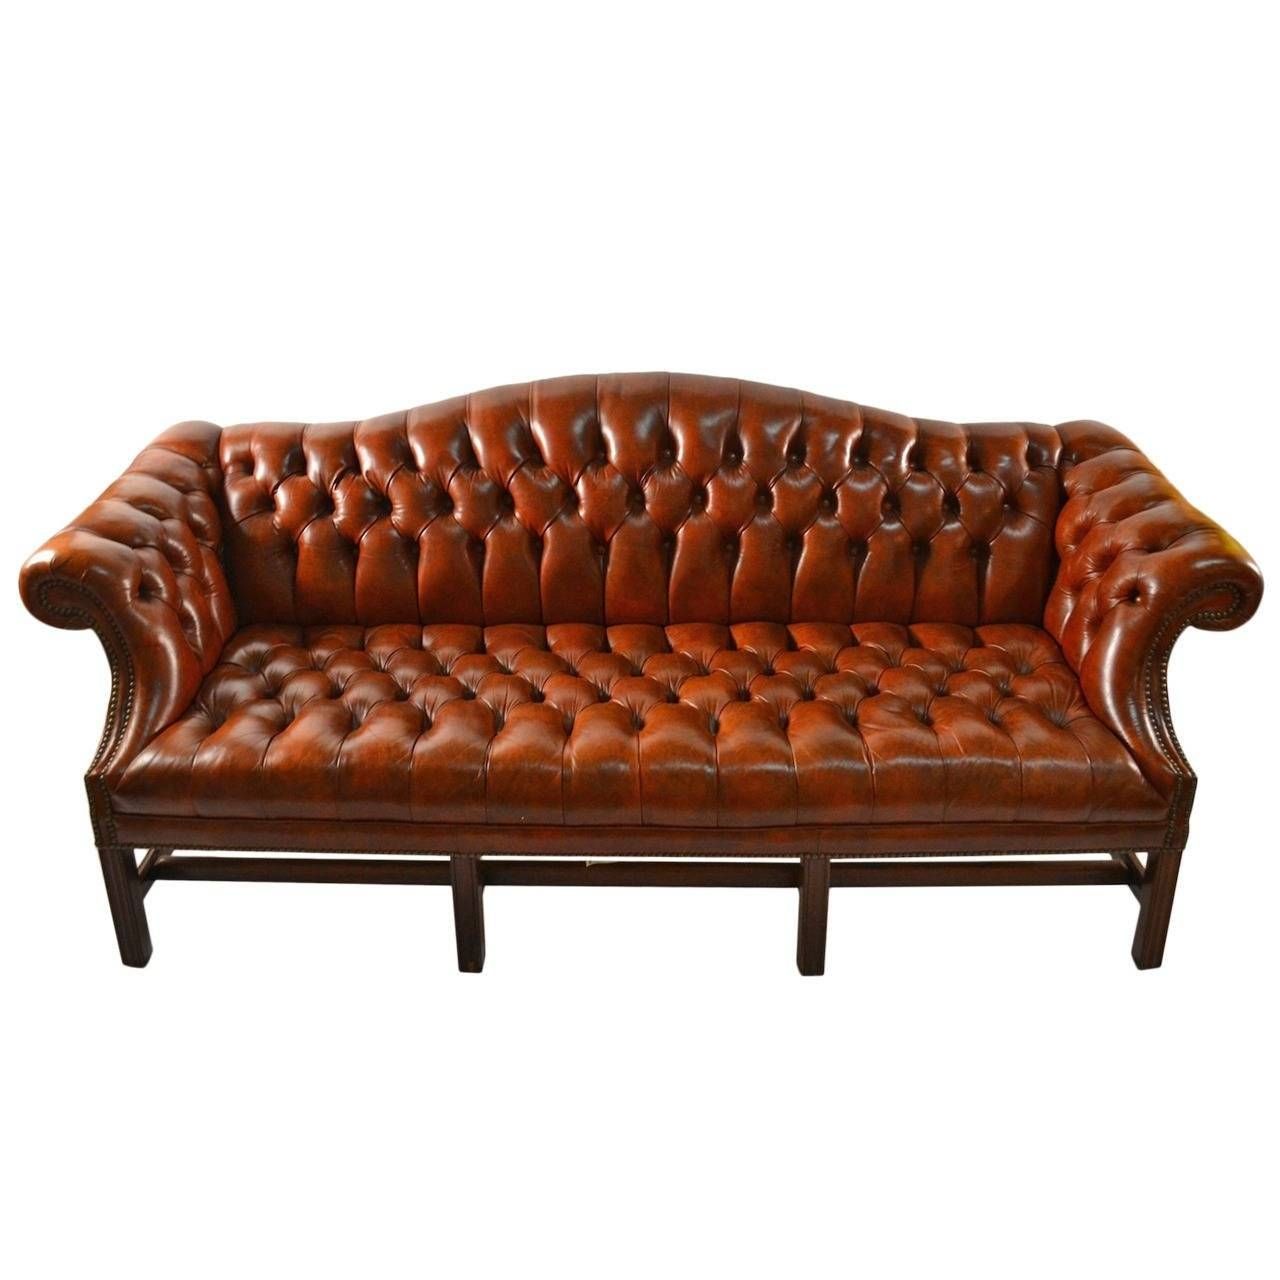 Leather Camel Back Sofa At 1stdibs Throughout Camelback Leather Sofas (View 4 of 15)